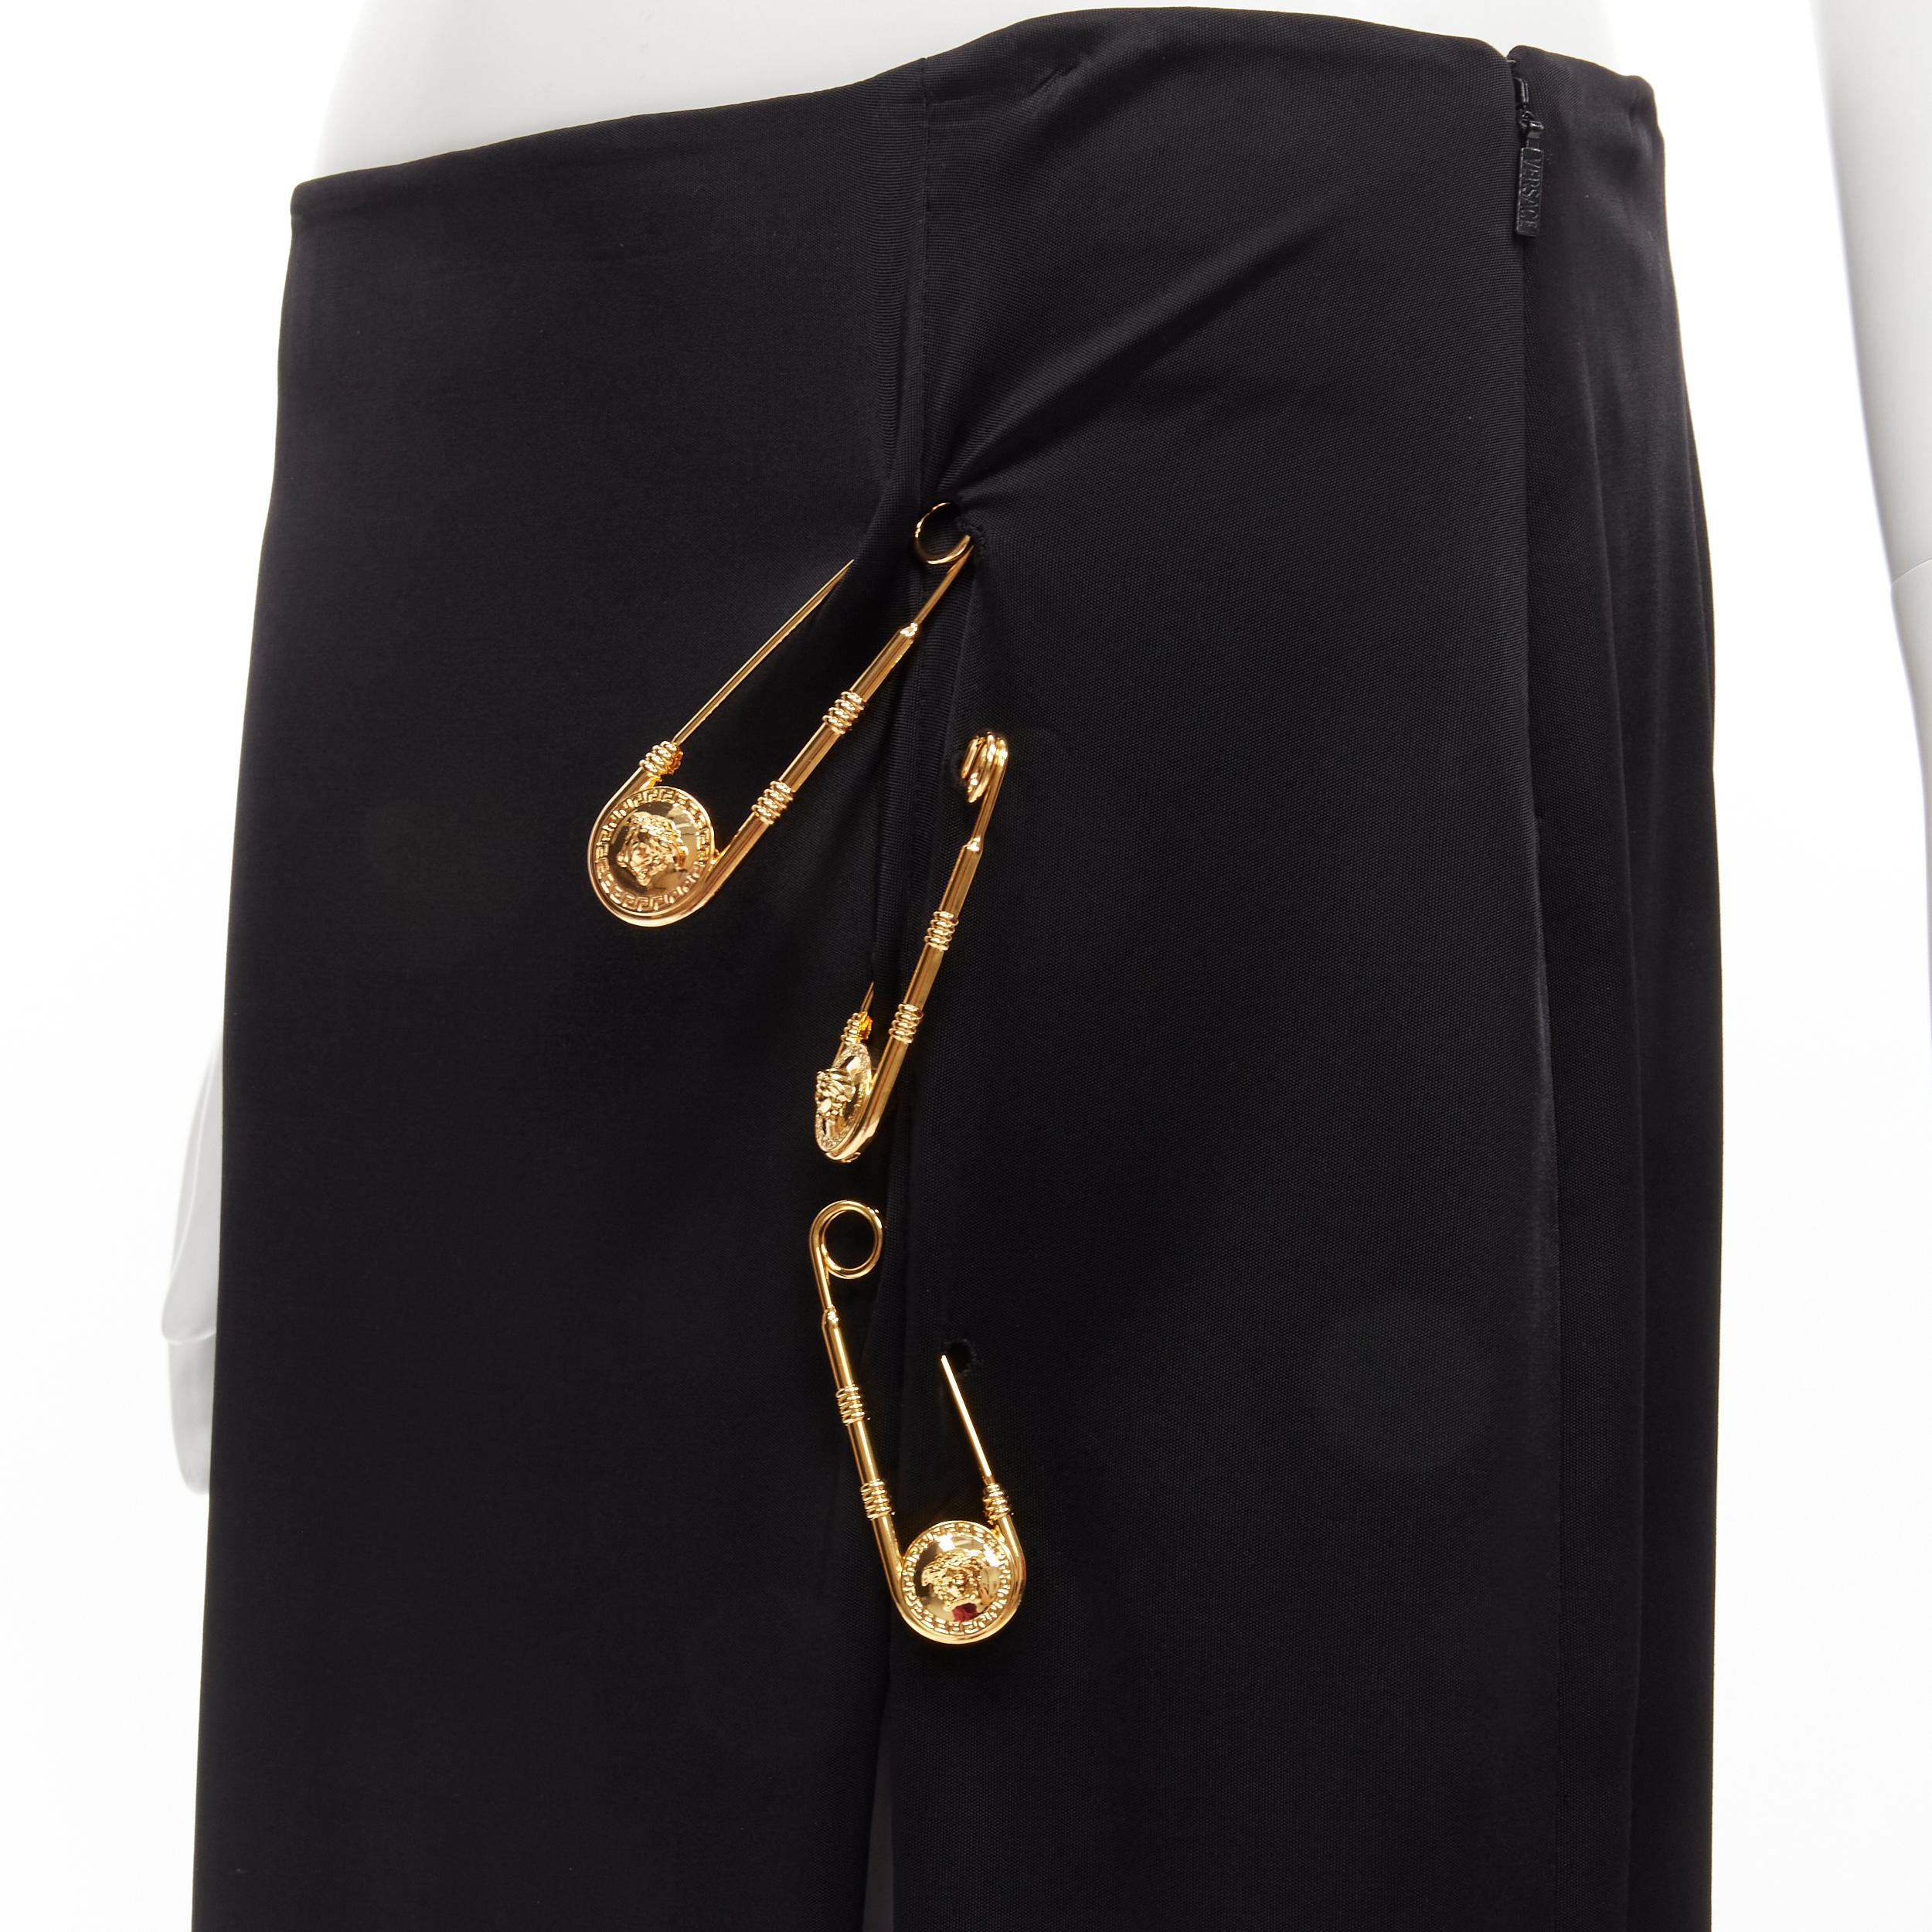 new VERSACE gold Medusa safety pin black viscose high slit skirt IT44 L 
Reference: TGAS/C00999 
Brand: Versace 
Designer: Donatella Versace 
Material: Viscose 
Color: Black 
Pattern: Solid 
Closure: Zip 
Extra Detail: Medusa head safety pin are